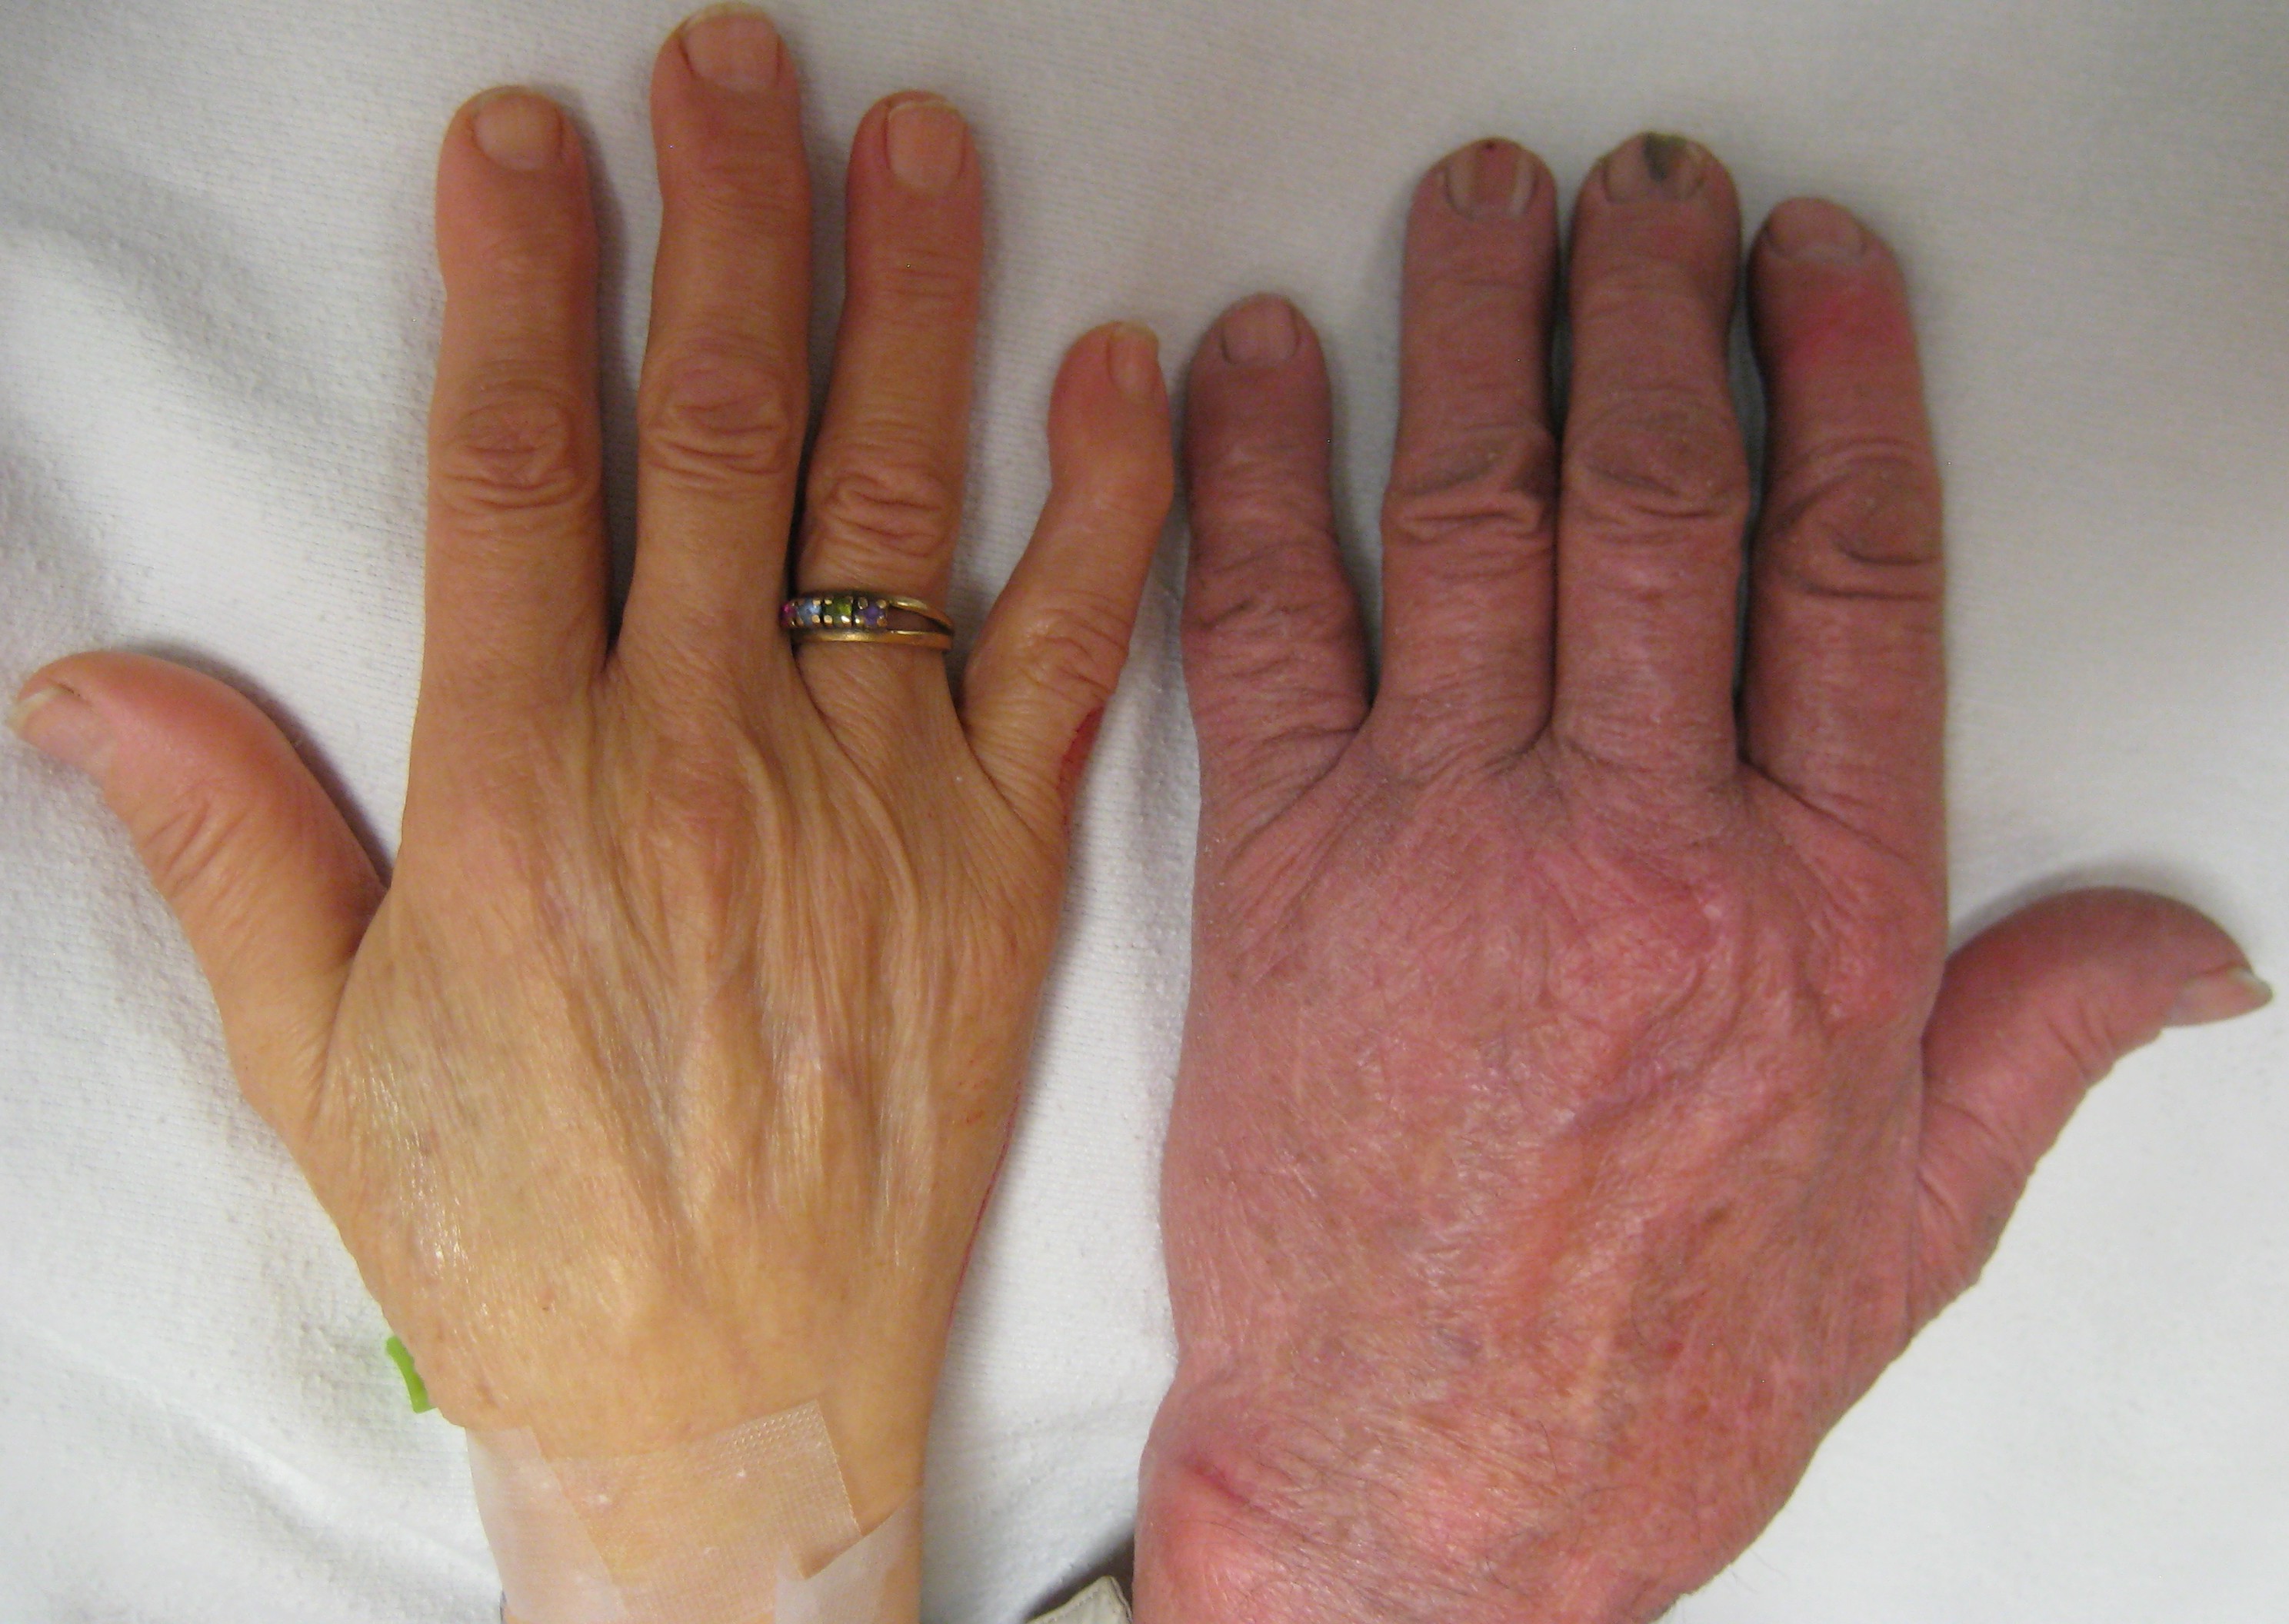 The hand of a person with severe anemia compared to one without (on the right) Source -James Heilman, MD - Own work[3]